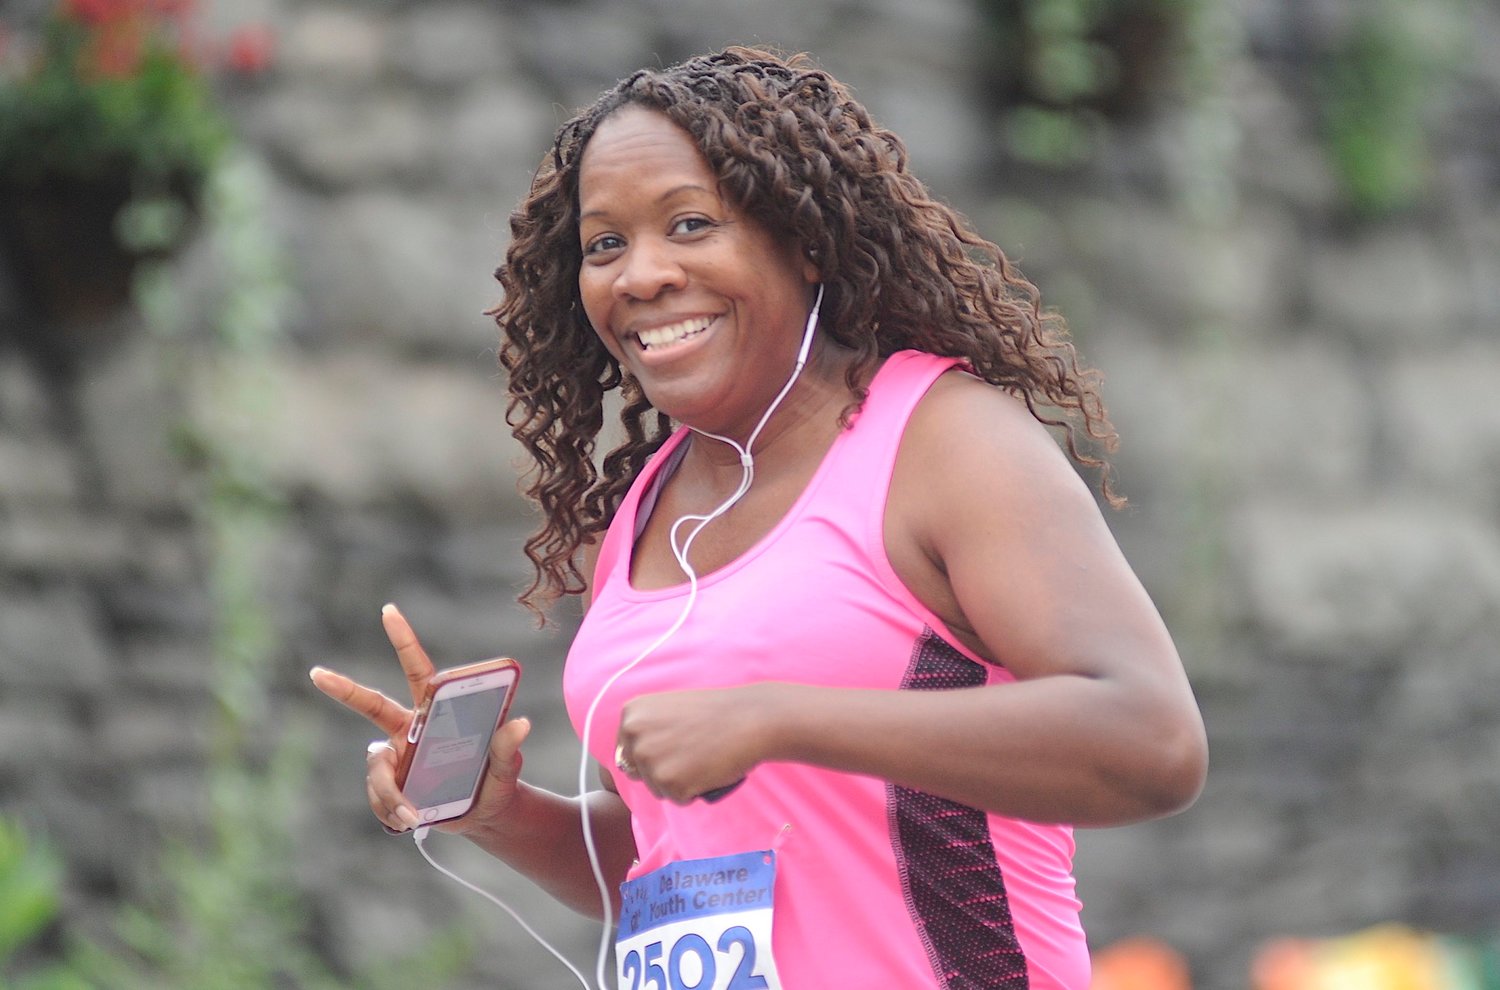 “V” is for valor. Adara Alston of Ithaca, NY finished 127th overall the 5K run and 62nd in the female category.